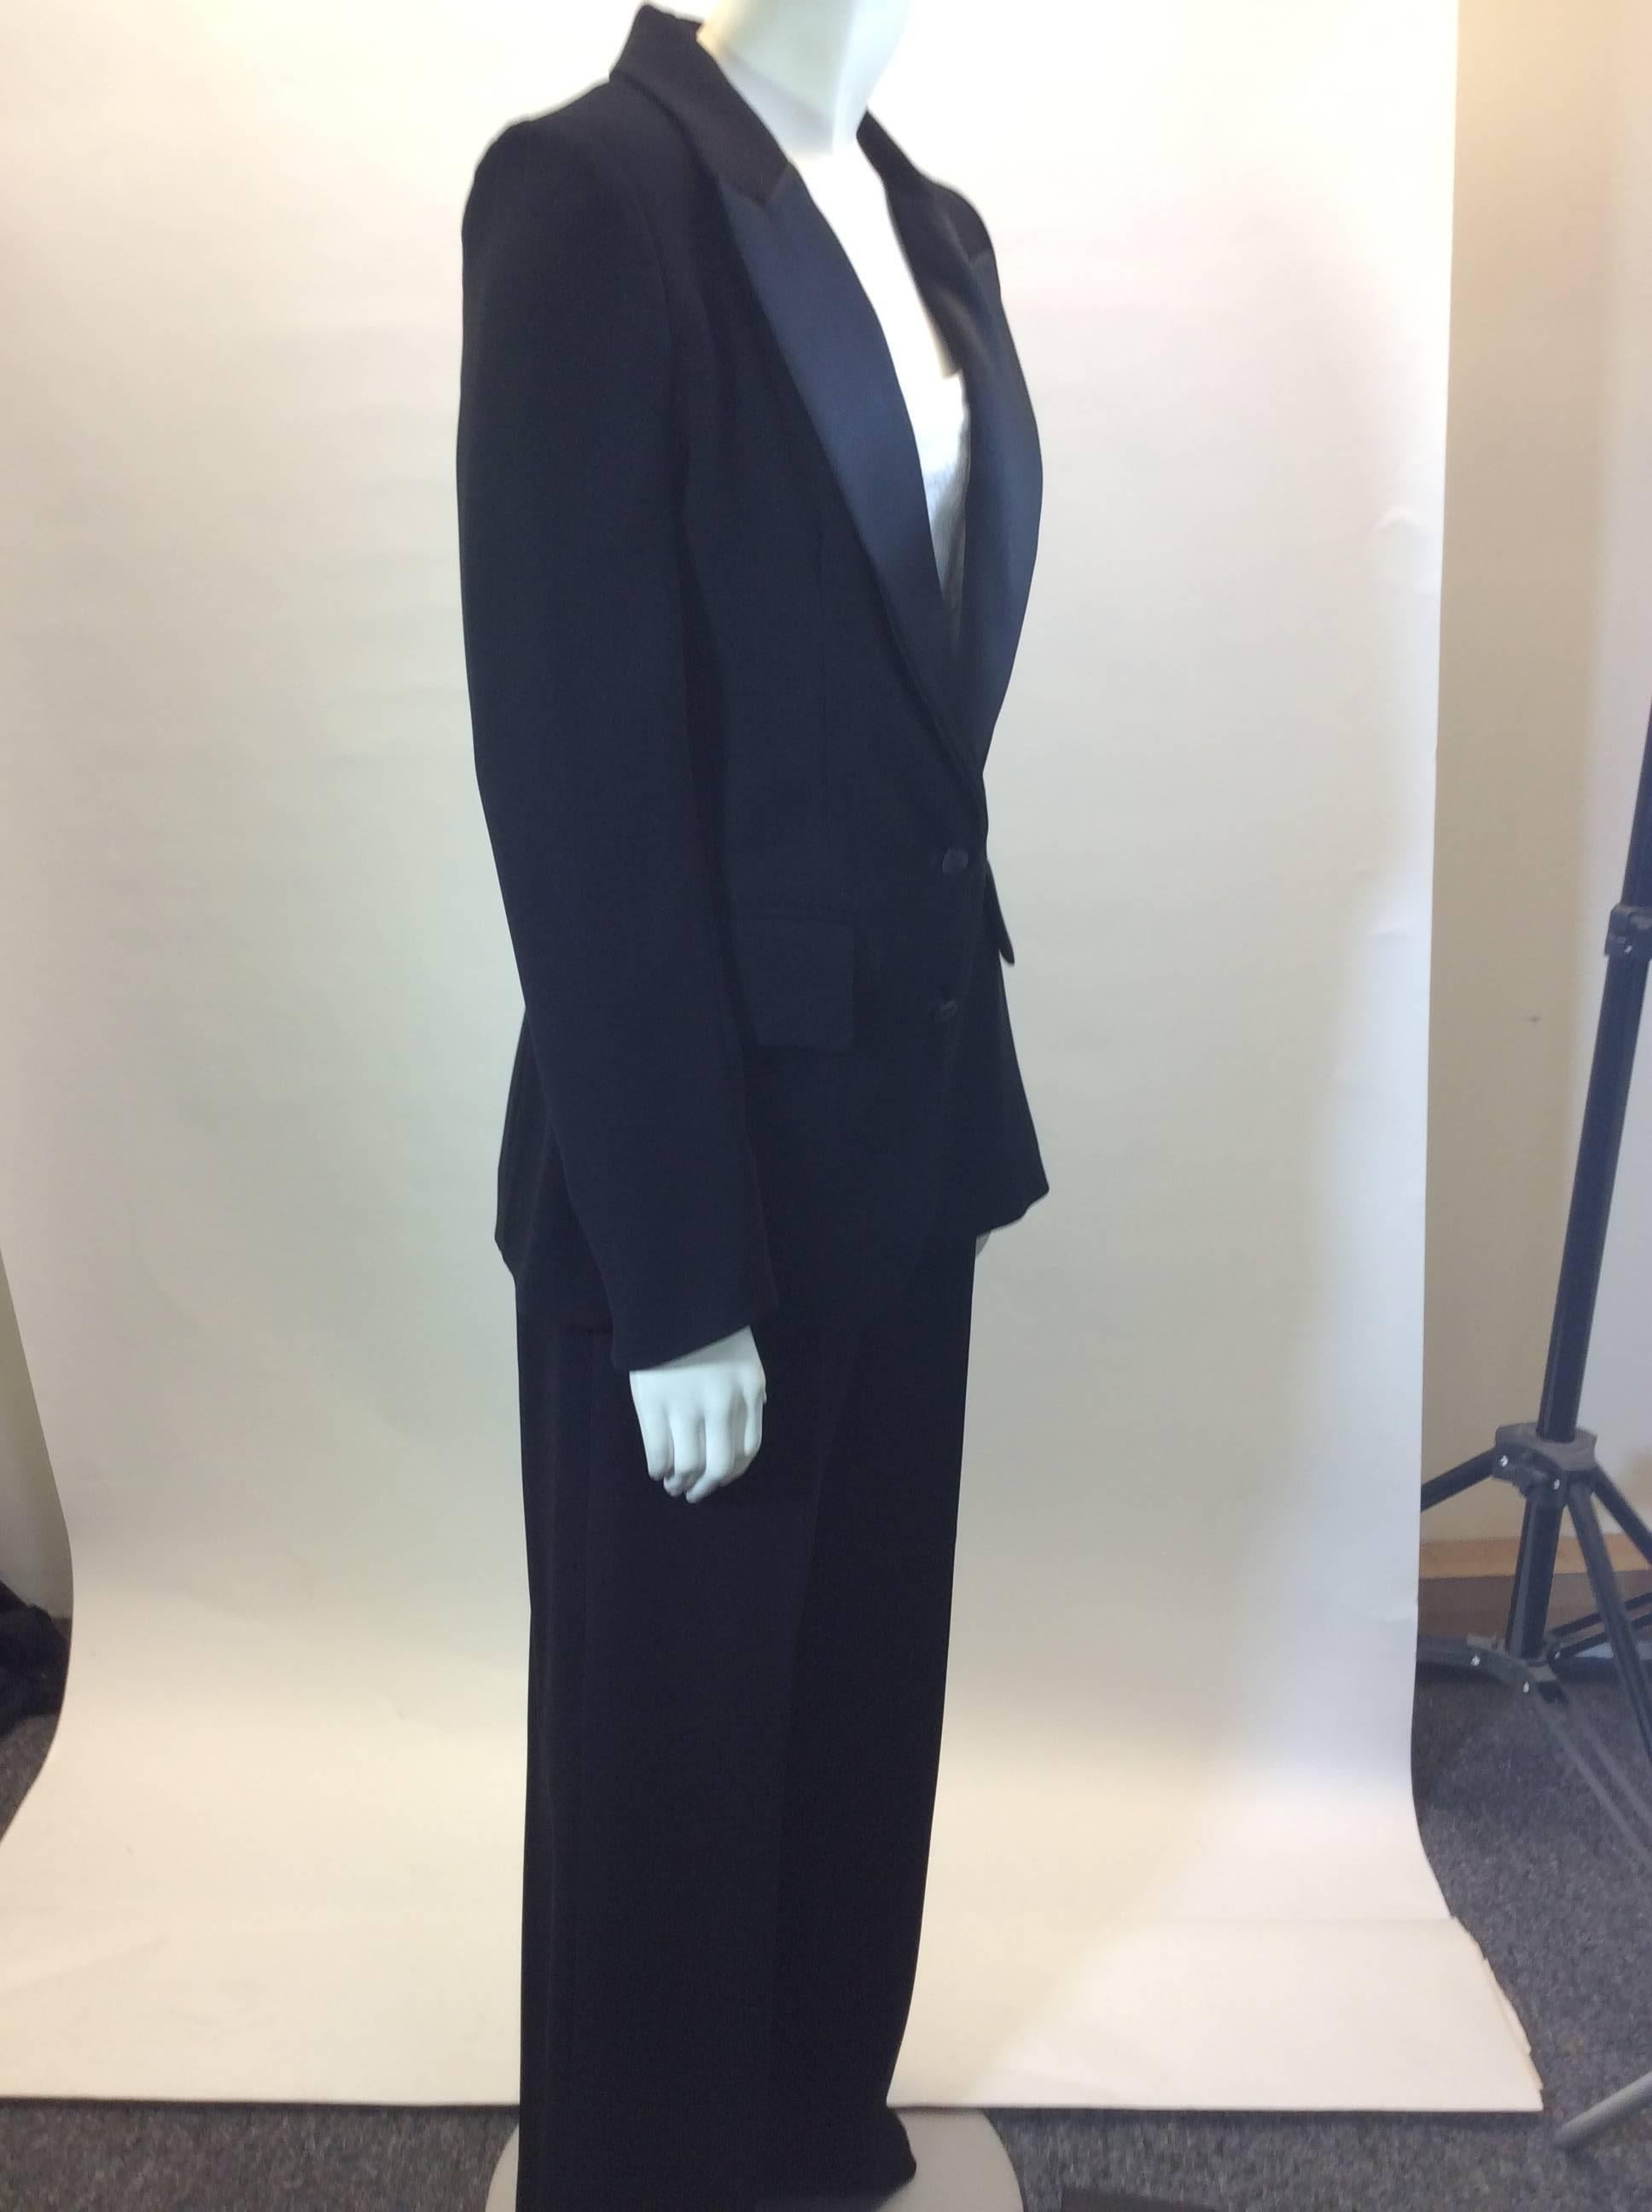 Yves Saint Laurent Pant Suit
Tuxedo style
Made in France
Blazer has 2 pockets and two center buttons
100% polyester 
Lined
Pants has three clasps and zipper